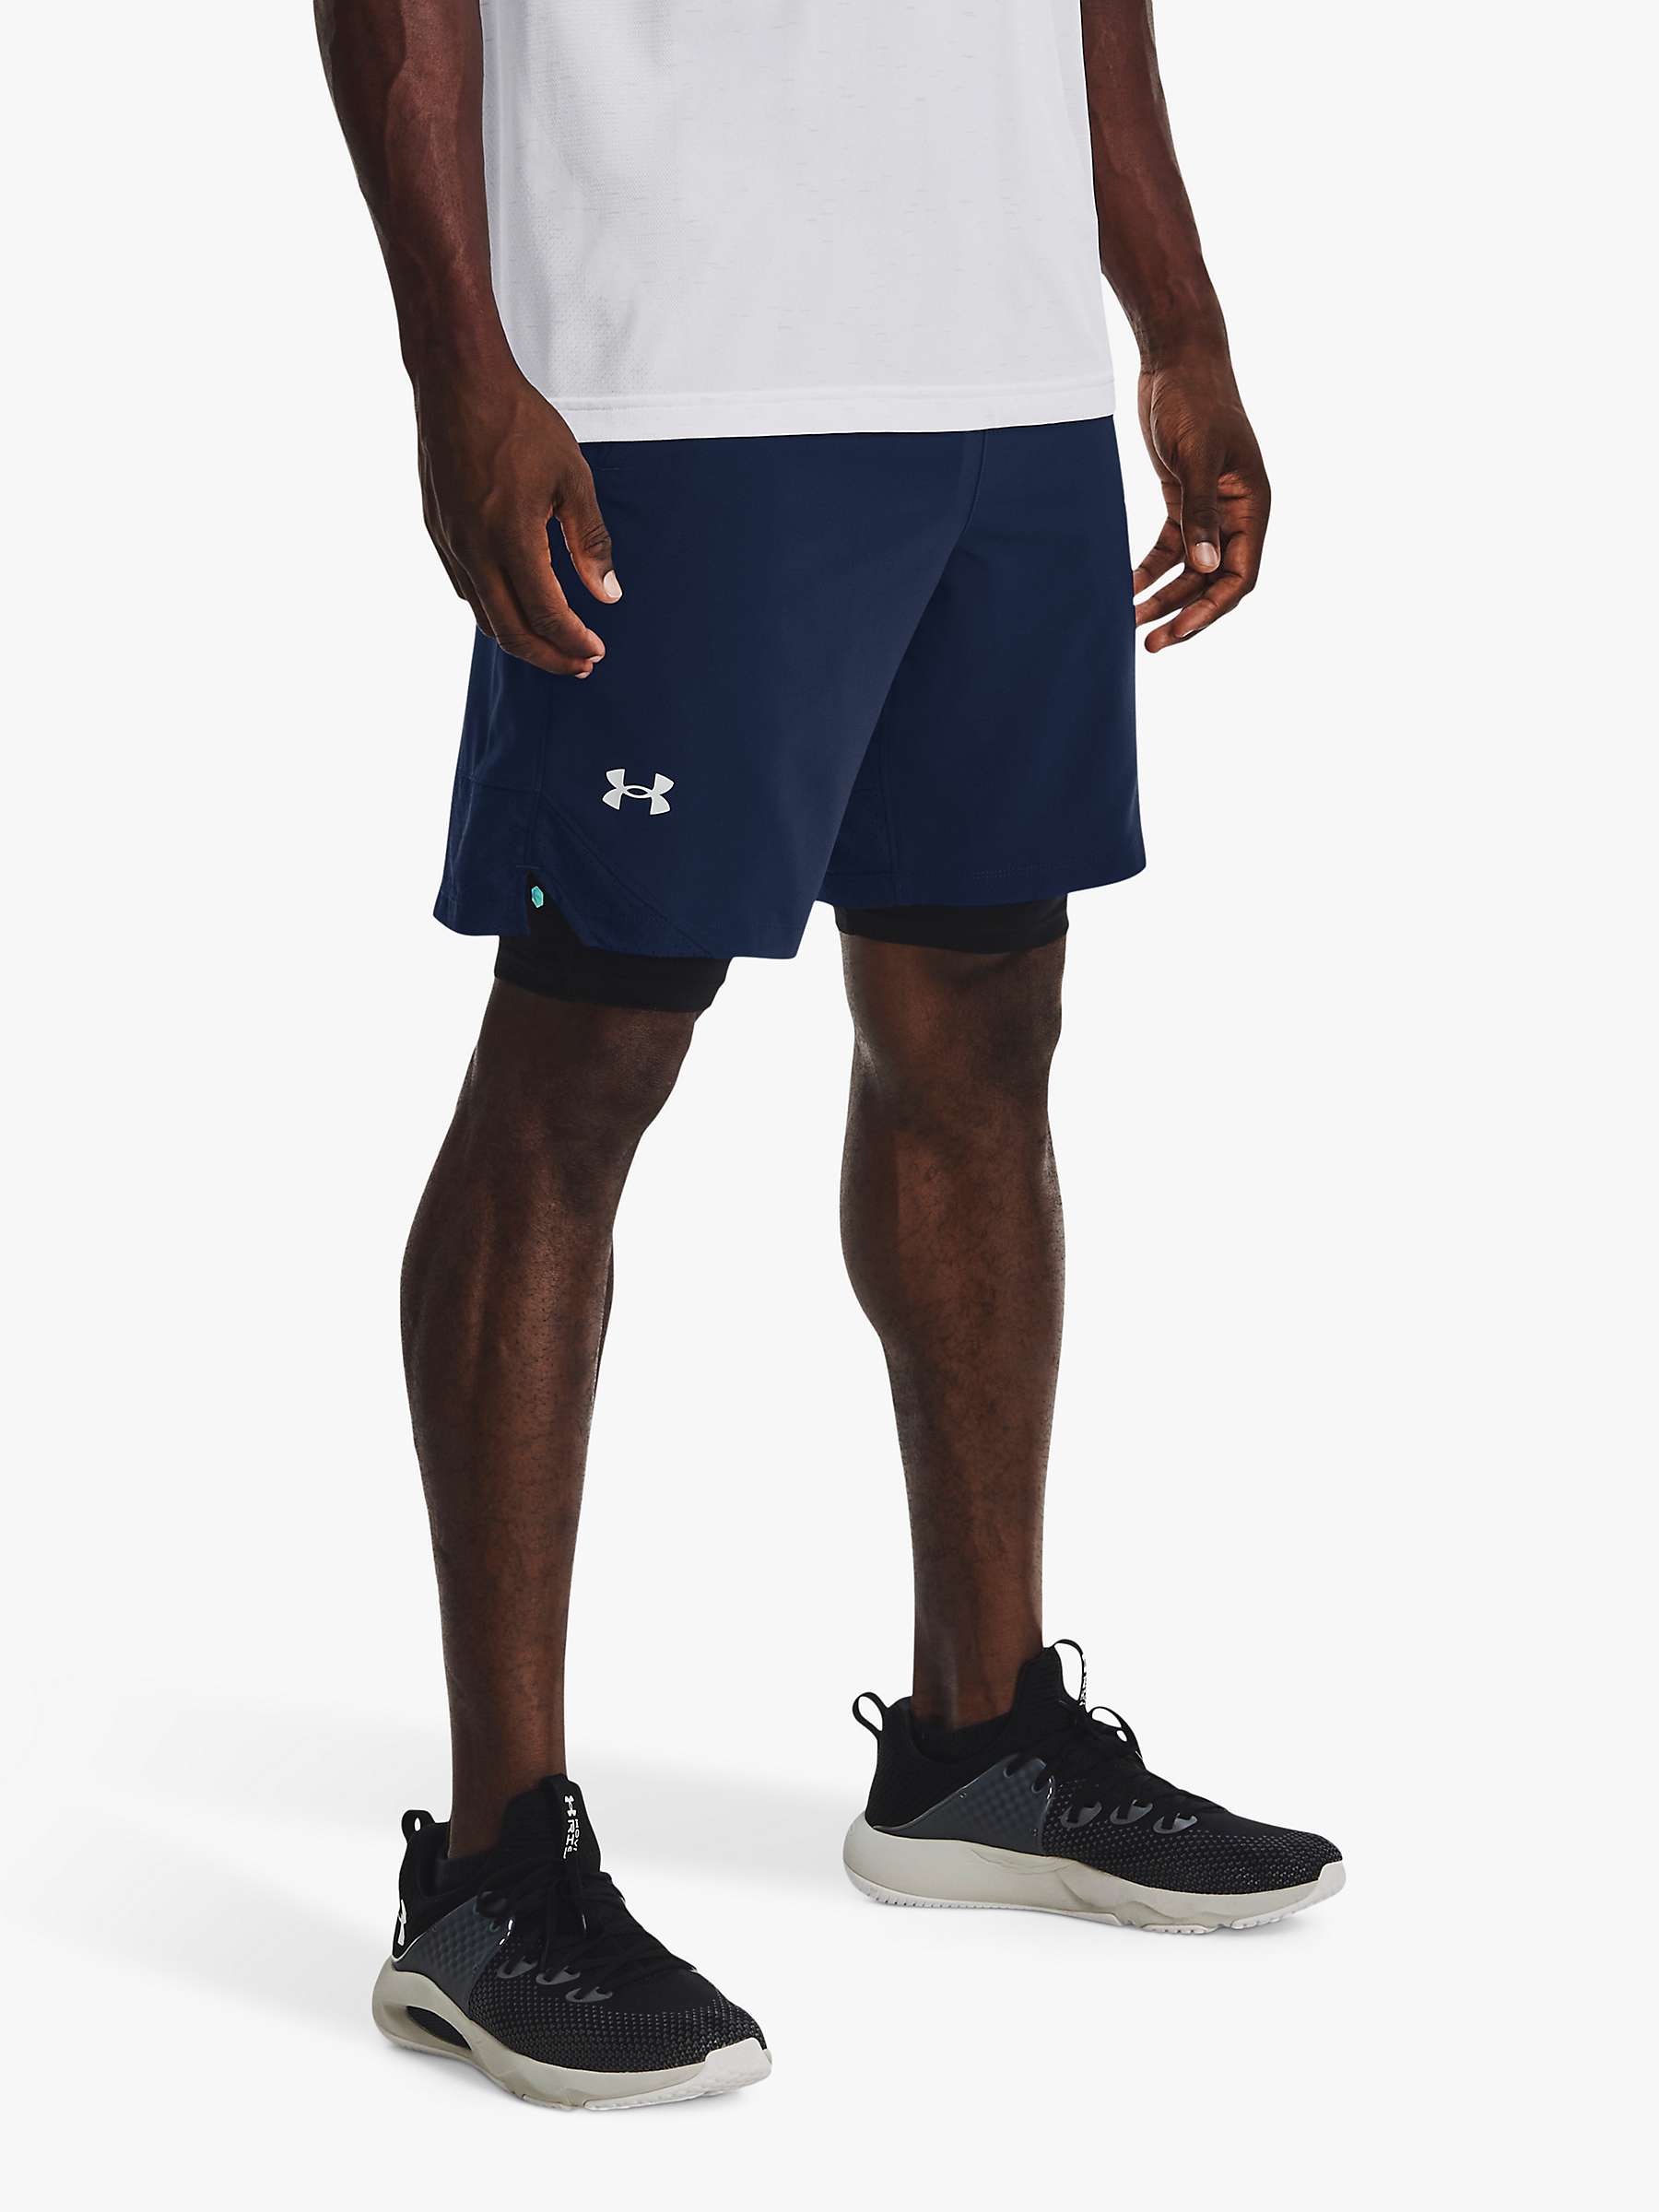 Buy Under Armour Vanish Woven Gym Shorts Online at johnlewis.com